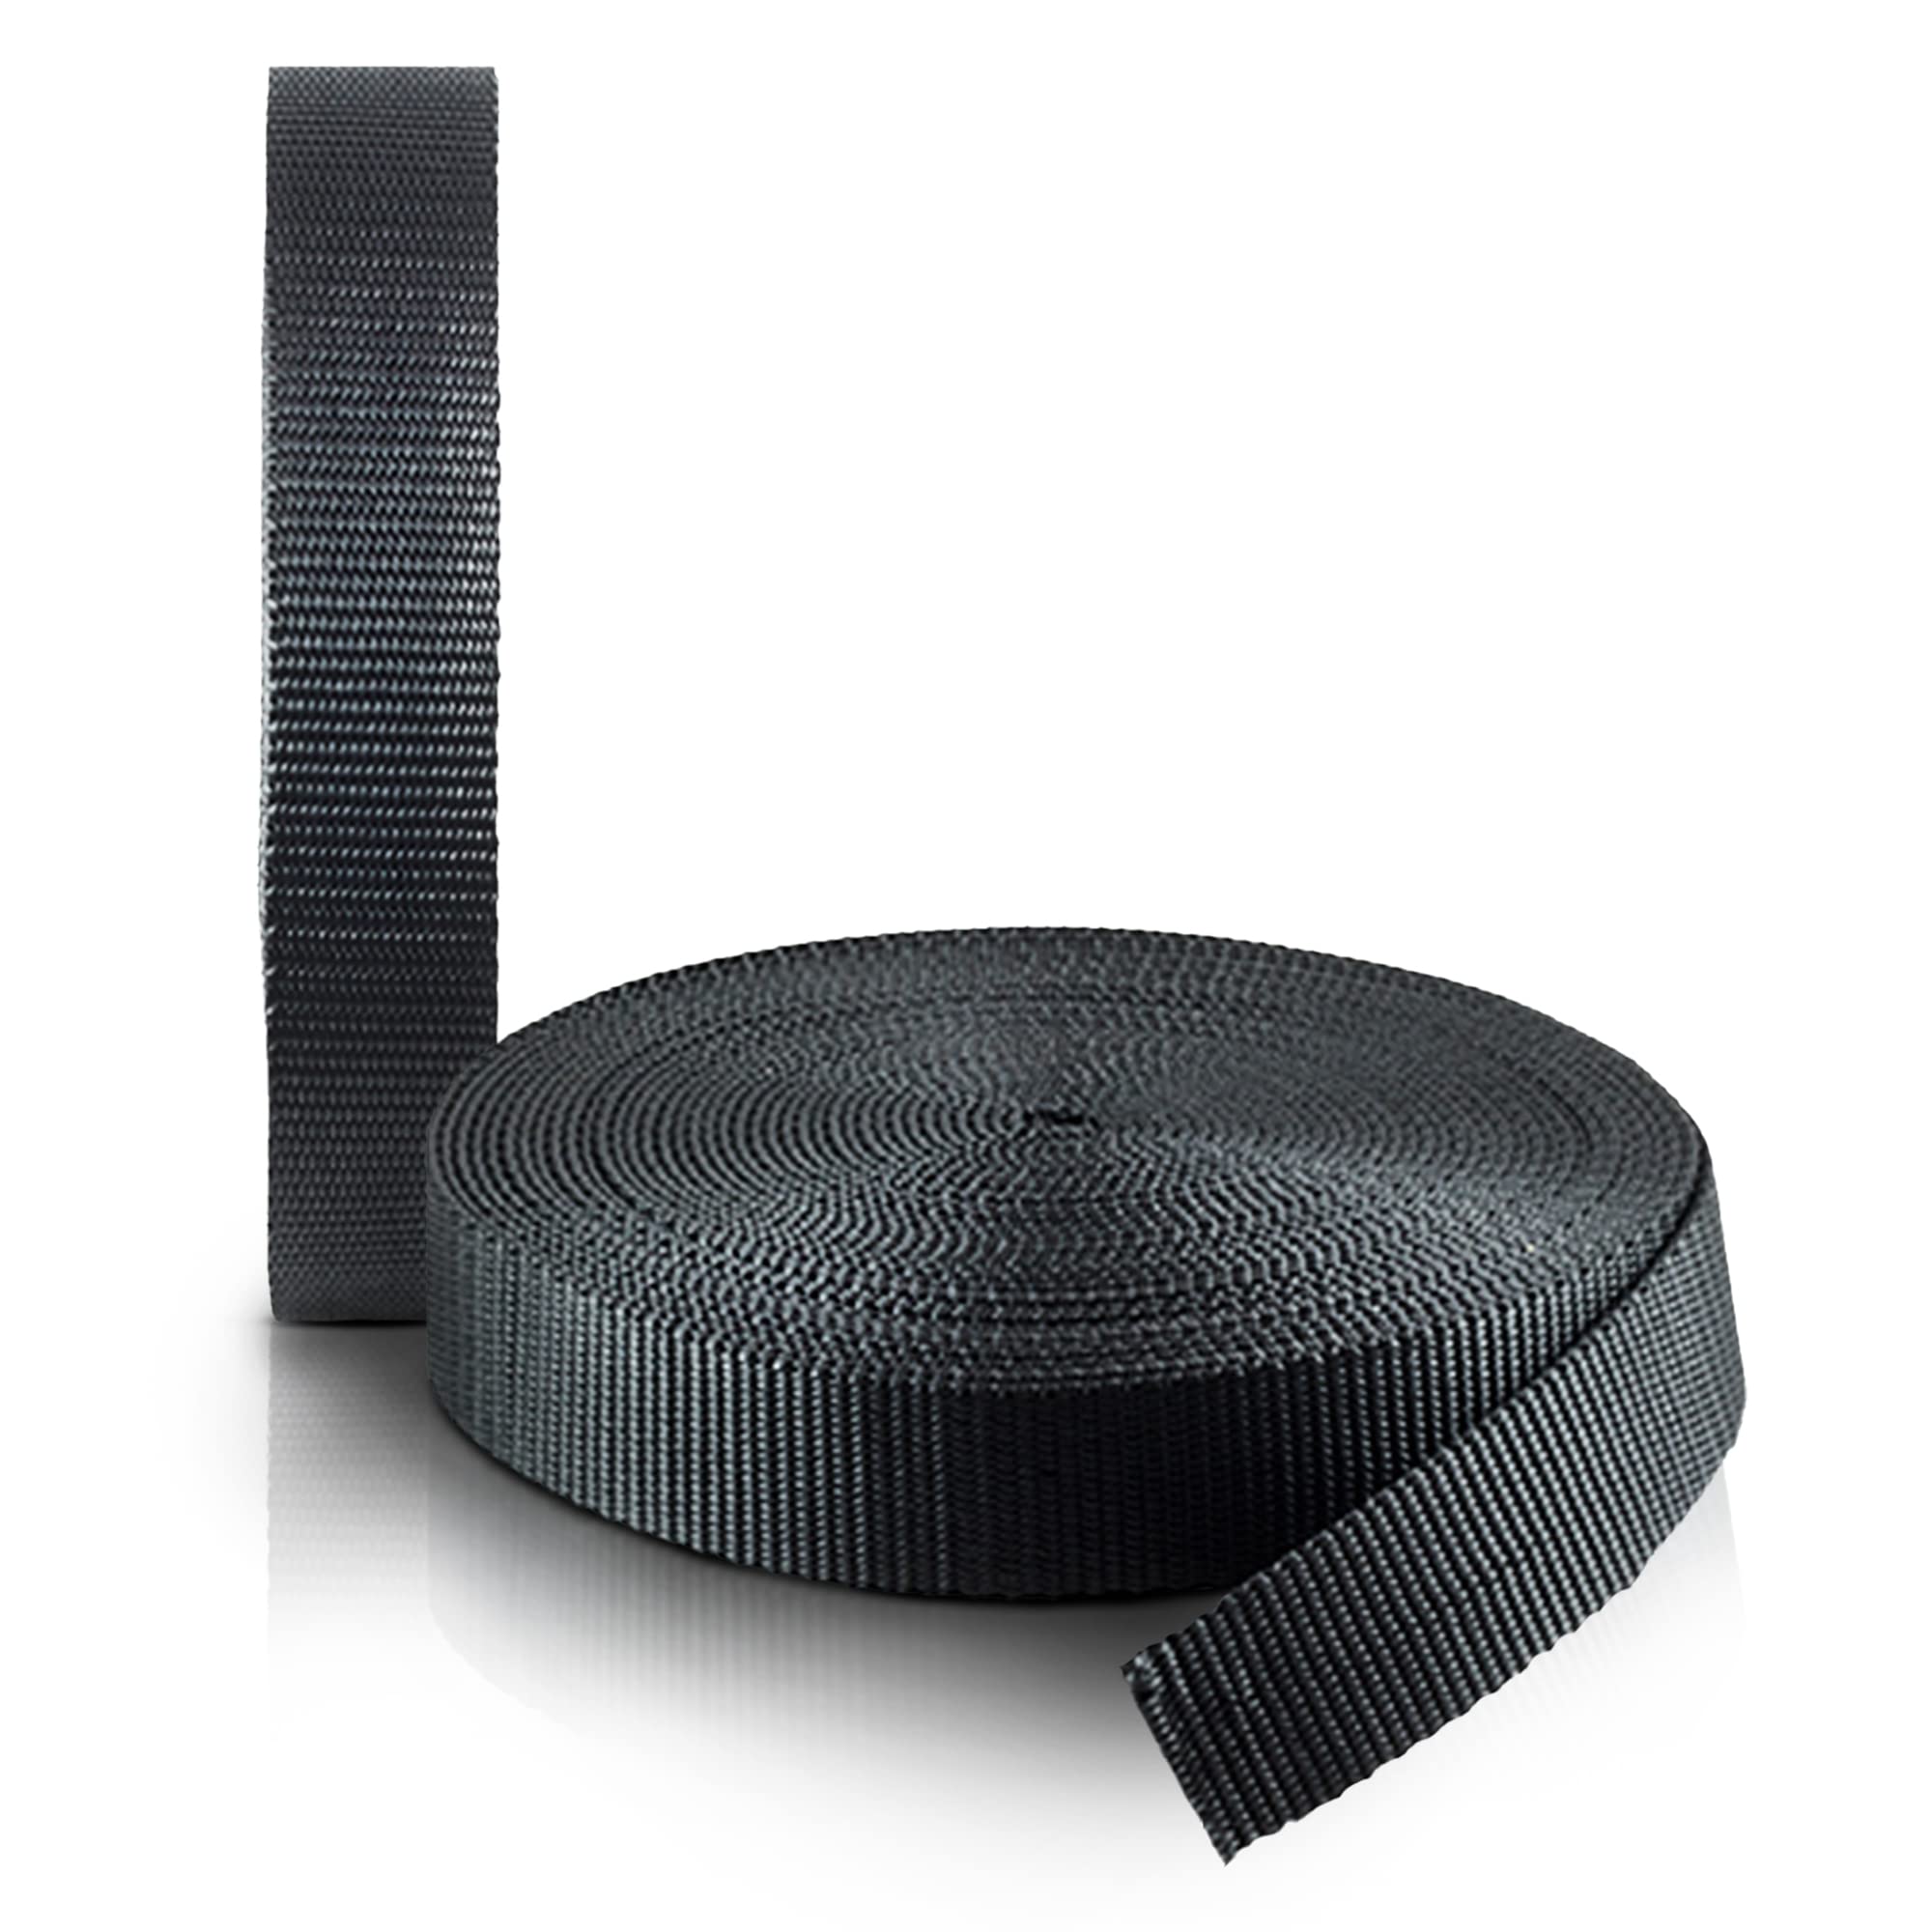 Houseables Nylon Strapping, Webbing Material, 1 Inch W x 10 Yard, Black,  Heavy Climbing Flat Strap, UV Resistant Fabric, Web for Bags, Backpacks